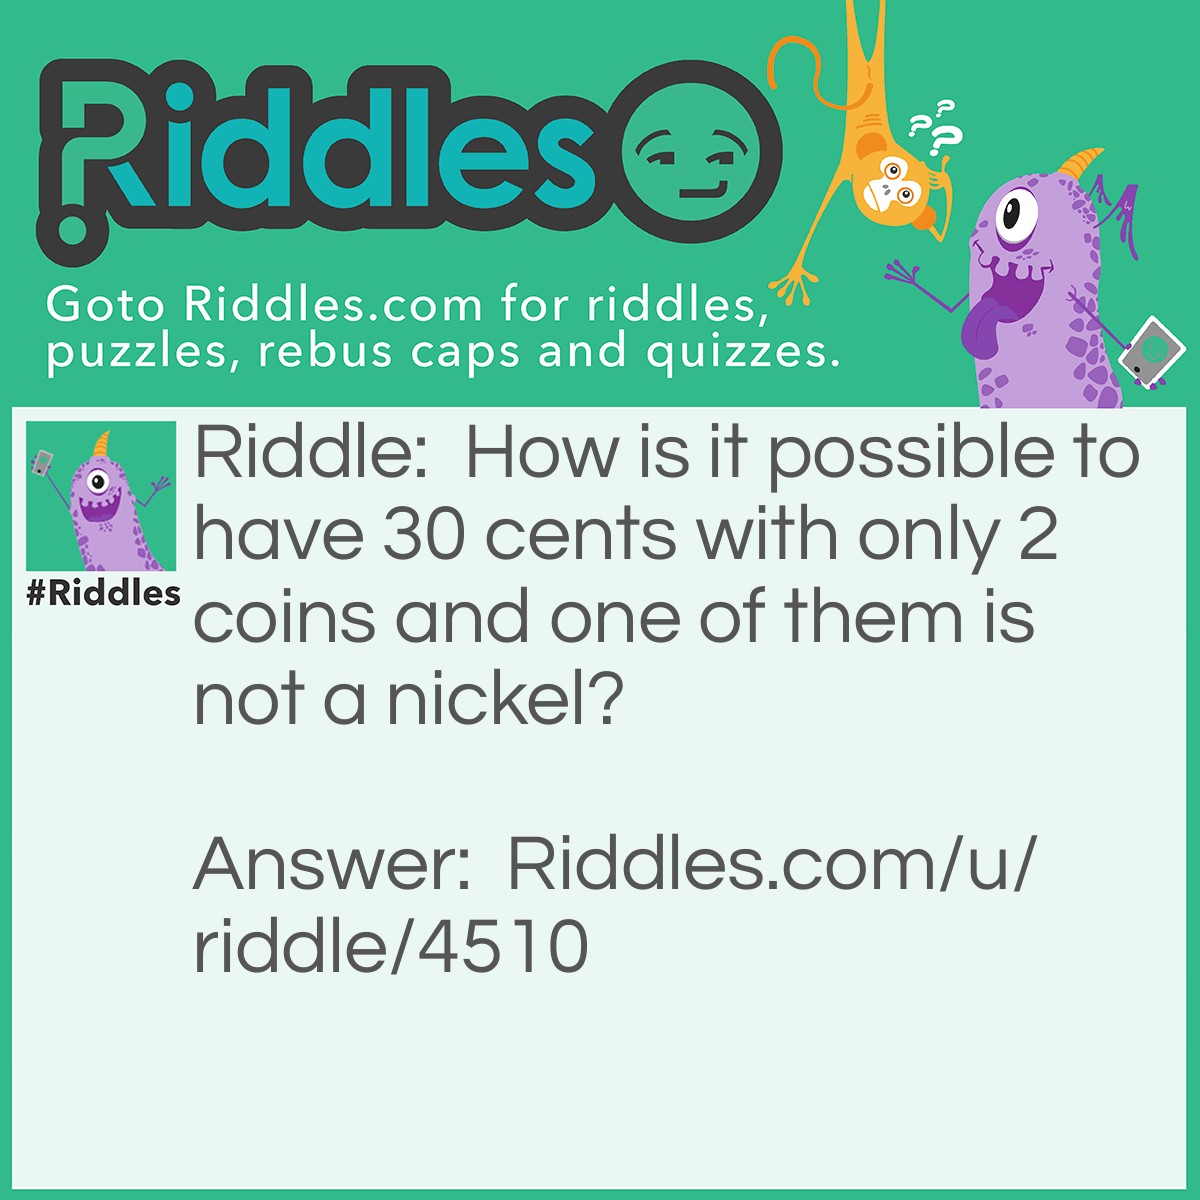 Riddle: How is it possible to have 30 cents with only 2 coins and one of them is not a nickel? Answer: A quarter and a nickel.The quarter is not a nickel.